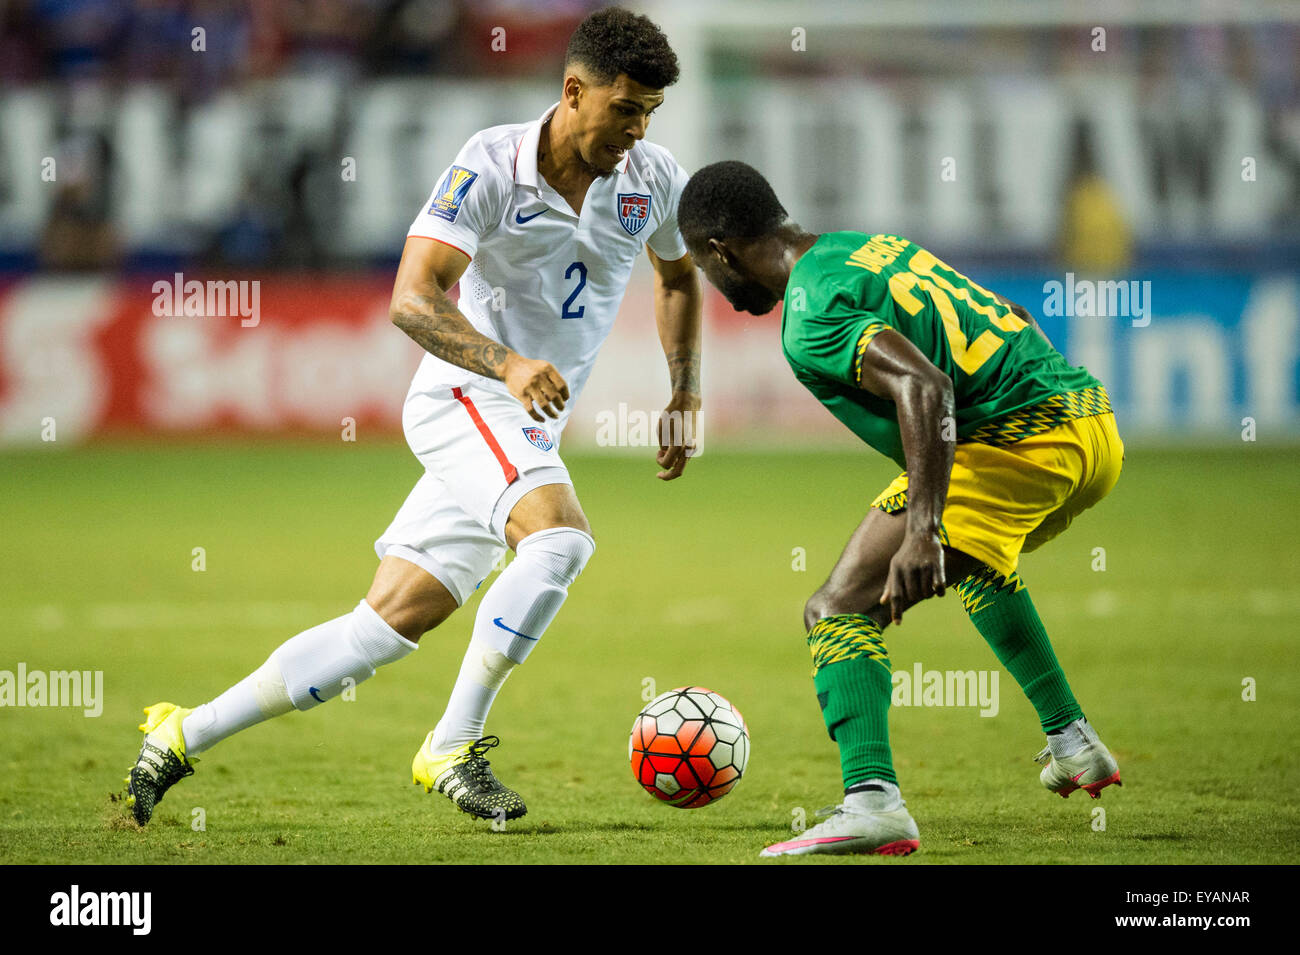 Atlanta, GA, USA. 22nd July, 2015. #2 USA M DeAndre Yedlin during the CONCACAF Gold Cup semifinal match between USA and Jamaica at the Georgia Dome in Atlanta, GA. Jacob Kupferman/CSM/Alamy Live News Stock Photo